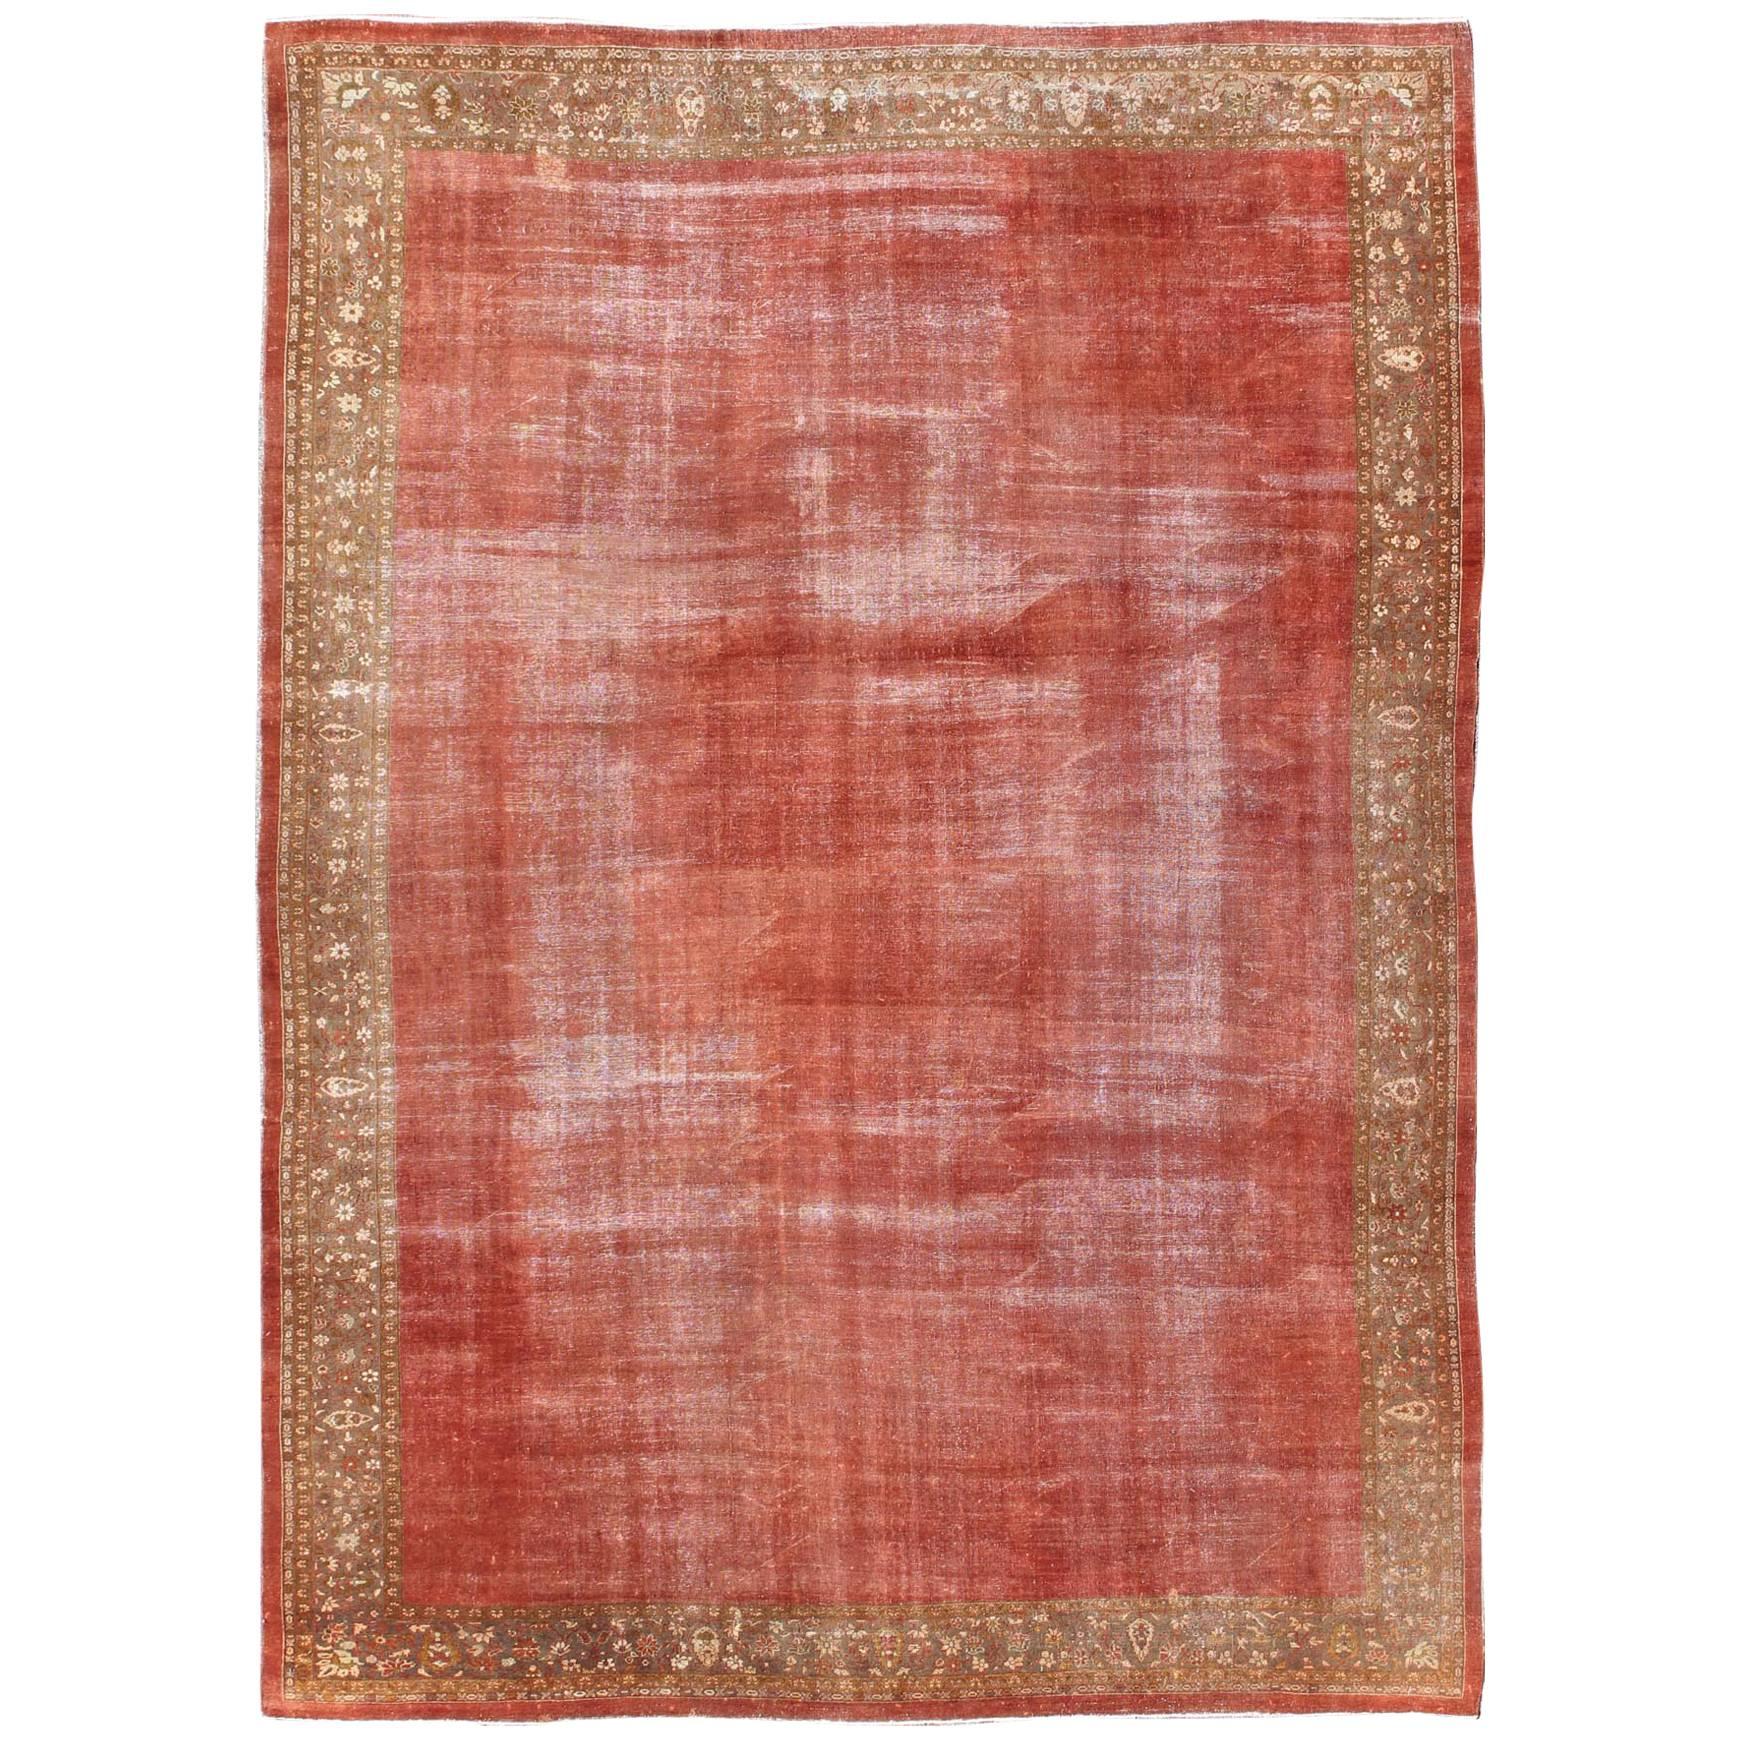 Antique Sultanabad Carpet with Open Red Field and Yellow-Green Floral Border For Sale